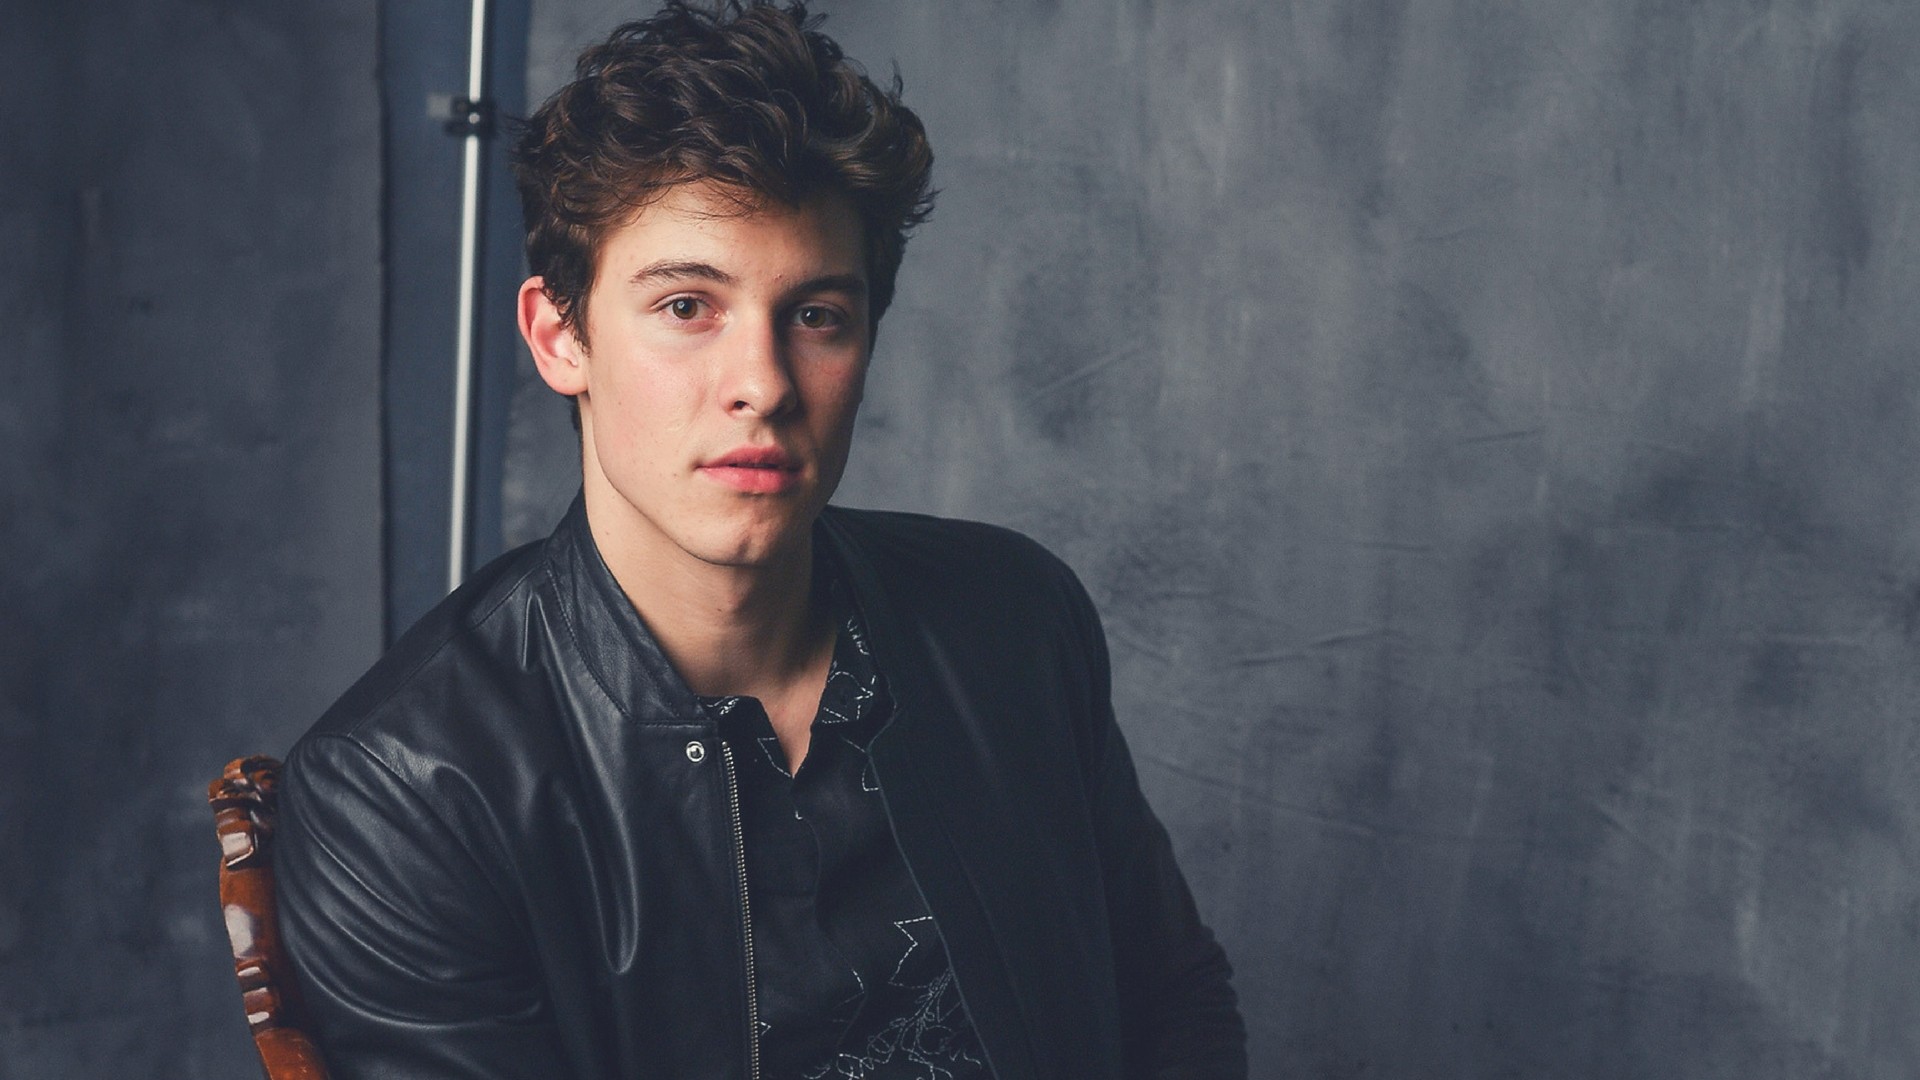 Shawn Mendes Picture